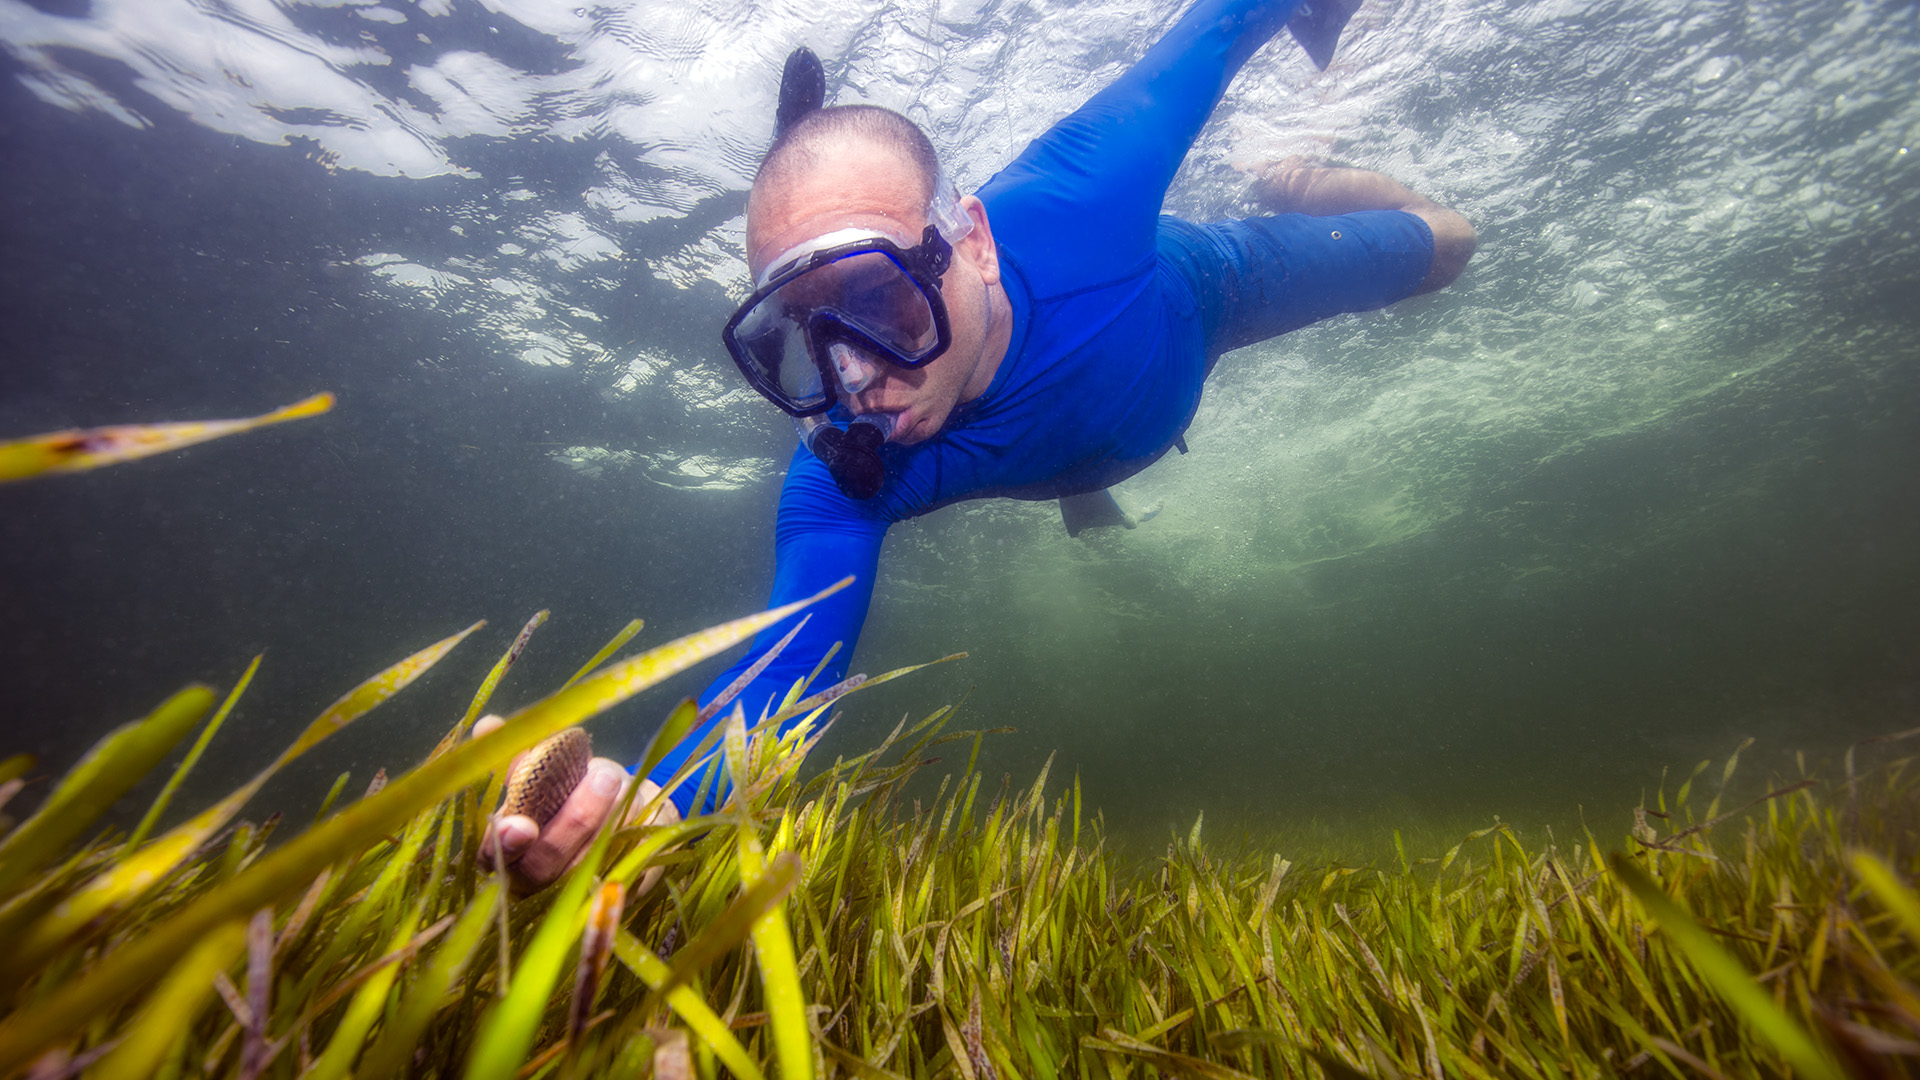 Seagrass and Seagrass Beds